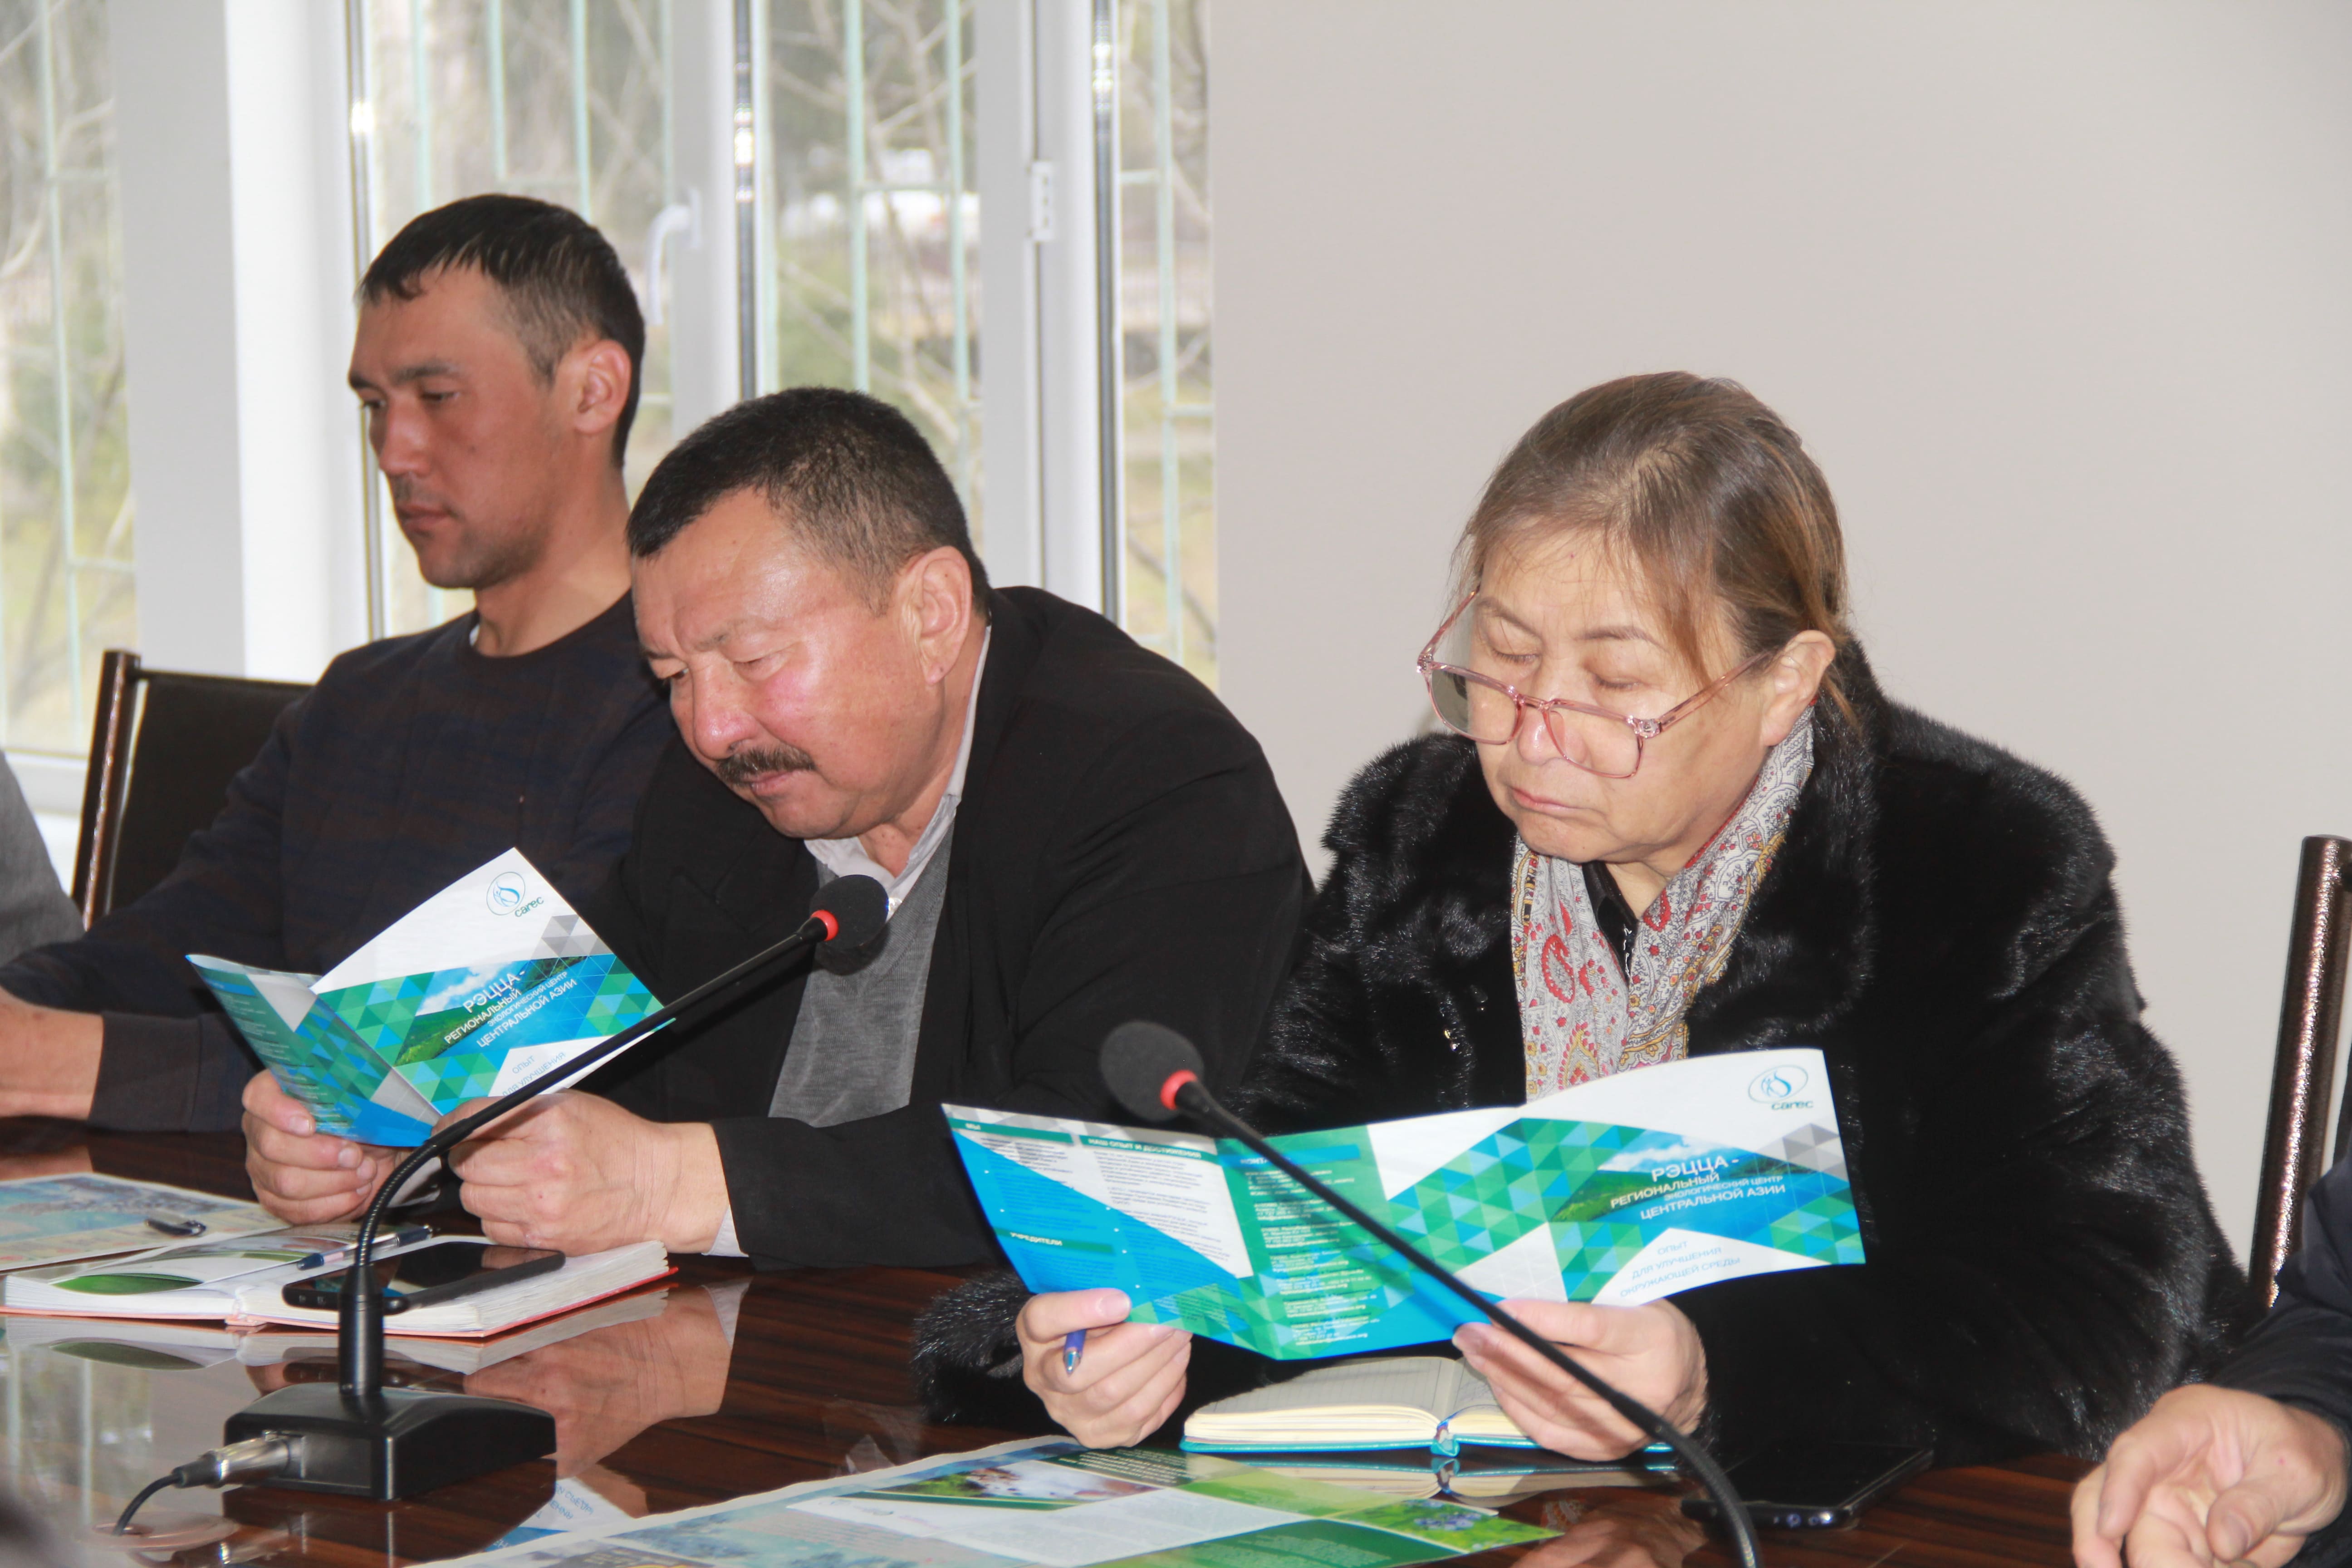 Kyrgyzstan has launched a new project to strengthen ecosystem resilience and develop the capacity of local communities.